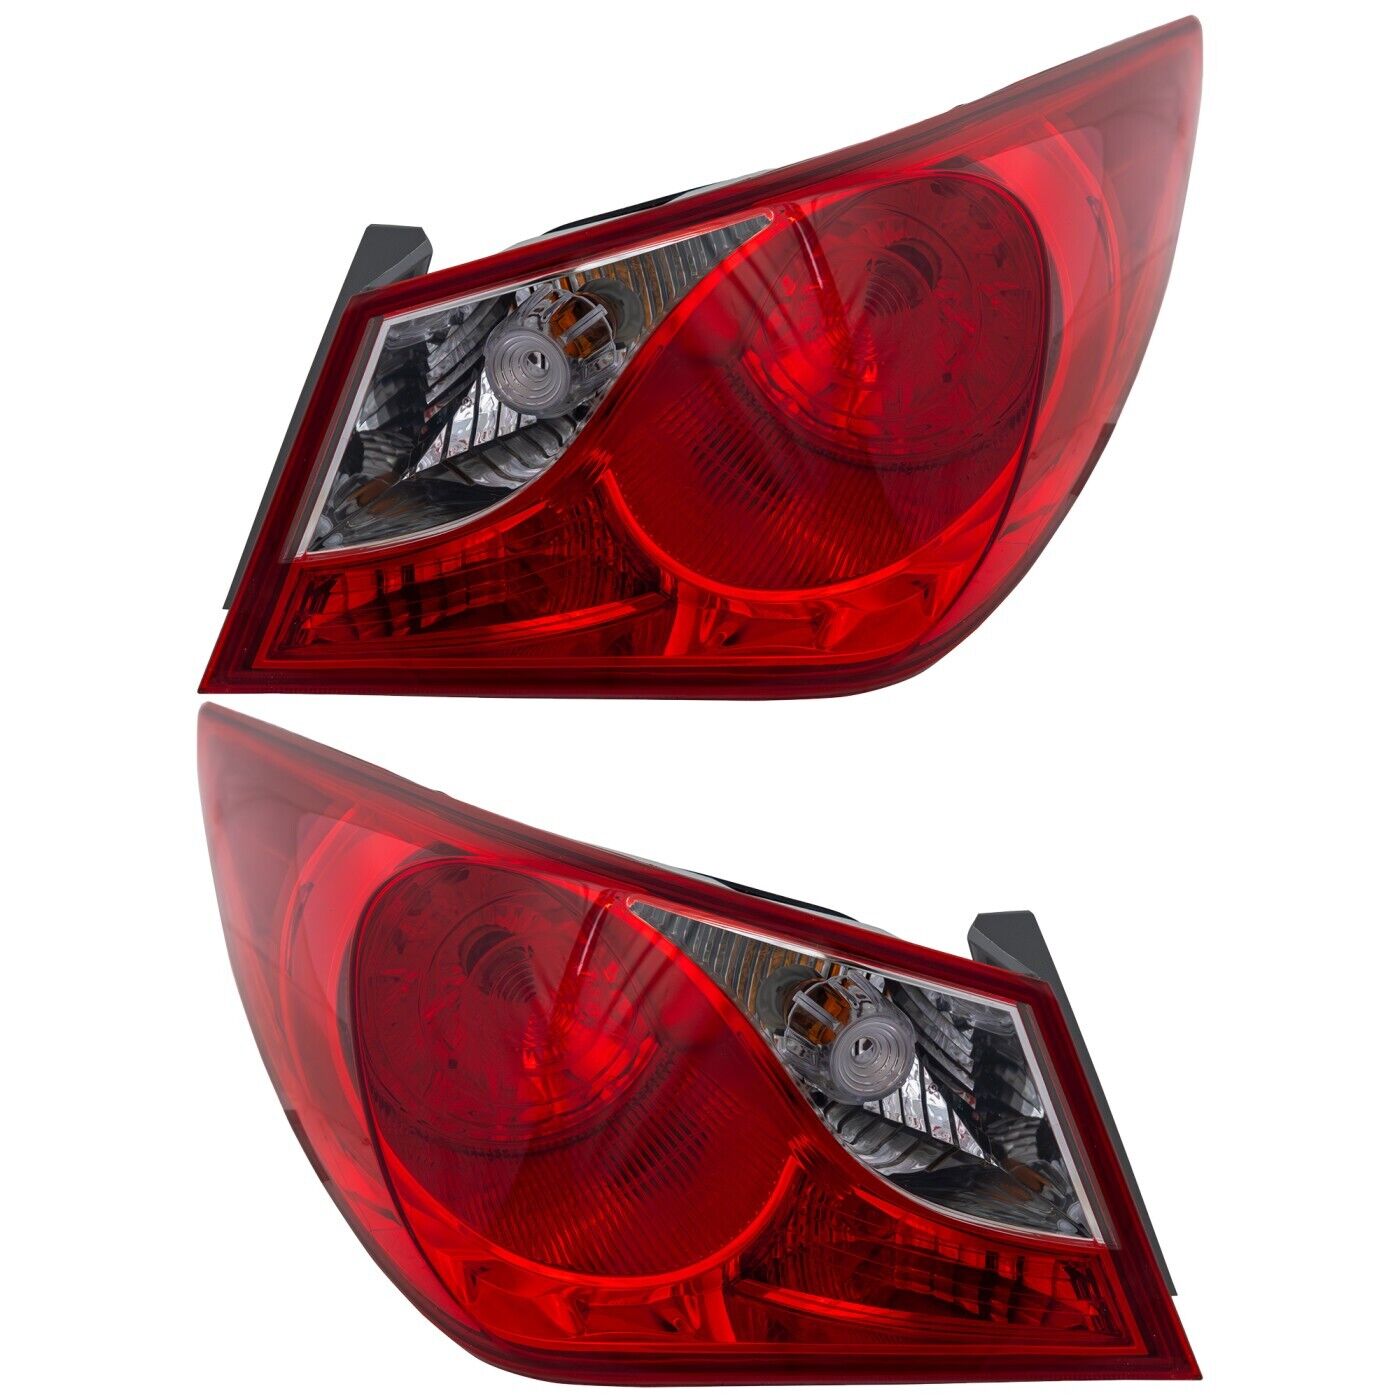 Pair Tail Light for 2011-2014 Hyundai Sonata LH RH Outer Body Mounted